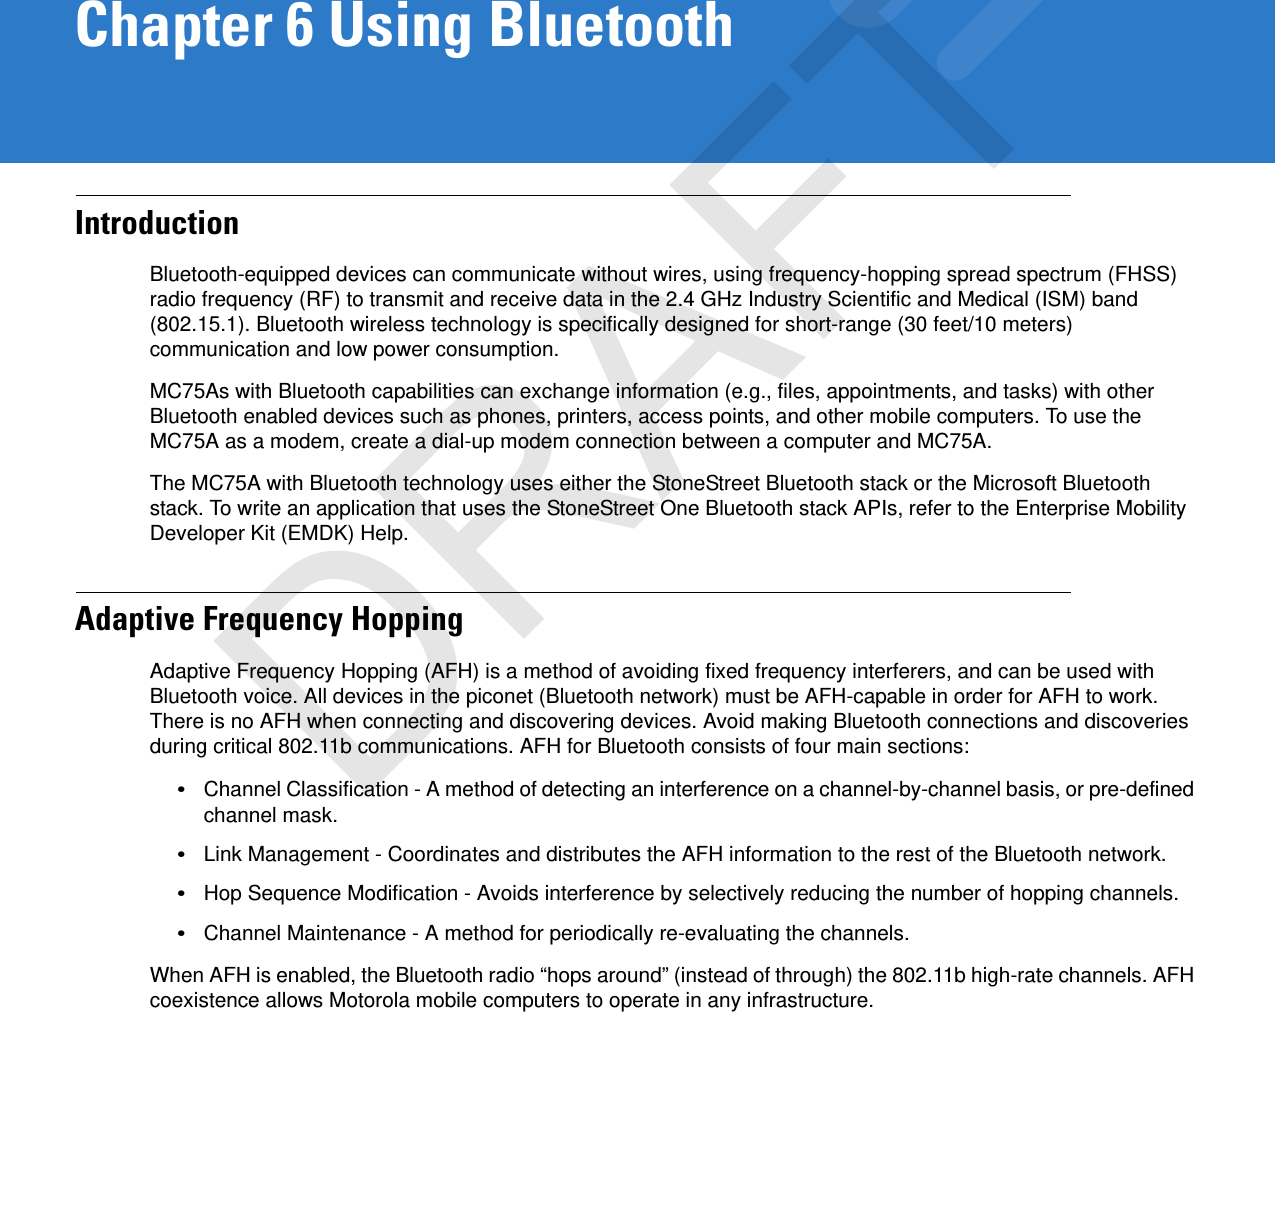 Chapter 6 Using BluetoothIntroductionBluetooth-equipped devices can communicate without wires, using frequency-hopping spread spectrum (FHSS) radio frequency (RF) to transmit and receive data in the 2.4 GHz Industry Scientific and Medical (ISM) band (802.15.1). Bluetooth wireless technology is specifically designed for short-range (30 feet/10 meters) communication and low power consumption. MC75As with Bluetooth capabilities can exchange information (e.g., files, appointments, and tasks) with other Bluetooth enabled devices such as phones, printers, access points, and other mobile computers. To use the MC75A as a modem, create a dial-up modem connection between a computer and MC75A.The MC75A with Bluetooth technology uses either the StoneStreet Bluetooth stack or the Microsoft Bluetooth stack. To write an application that uses the StoneStreet One Bluetooth stack APIs, refer to the Enterprise Mobility Developer Kit (EMDK) Help.Adaptive Frequency HoppingAdaptive Frequency Hopping (AFH) is a method of avoiding fixed frequency interferers, and can be used with Bluetooth voice. All devices in the piconet (Bluetooth network) must be AFH-capable in order for AFH to work. There is no AFH when connecting and discovering devices. Avoid making Bluetooth connections and discoveries during critical 802.11b communications. AFH for Bluetooth consists of four main sections:•Channel Classification - A method of detecting an interference on a channel-by-channel basis, or pre-defined channel mask.•Link Management - Coordinates and distributes the AFH information to the rest of the Bluetooth network.•Hop Sequence Modification - Avoids interference by selectively reducing the number of hopping channels.•Channel Maintenance - A method for periodically re-evaluating the channels.When AFH is enabled, the Bluetooth radio “hops around” (instead of through) the 802.11b high-rate channels. AFH coexistence allows Motorola mobile computers to operate in any infrastructure. DRAFT